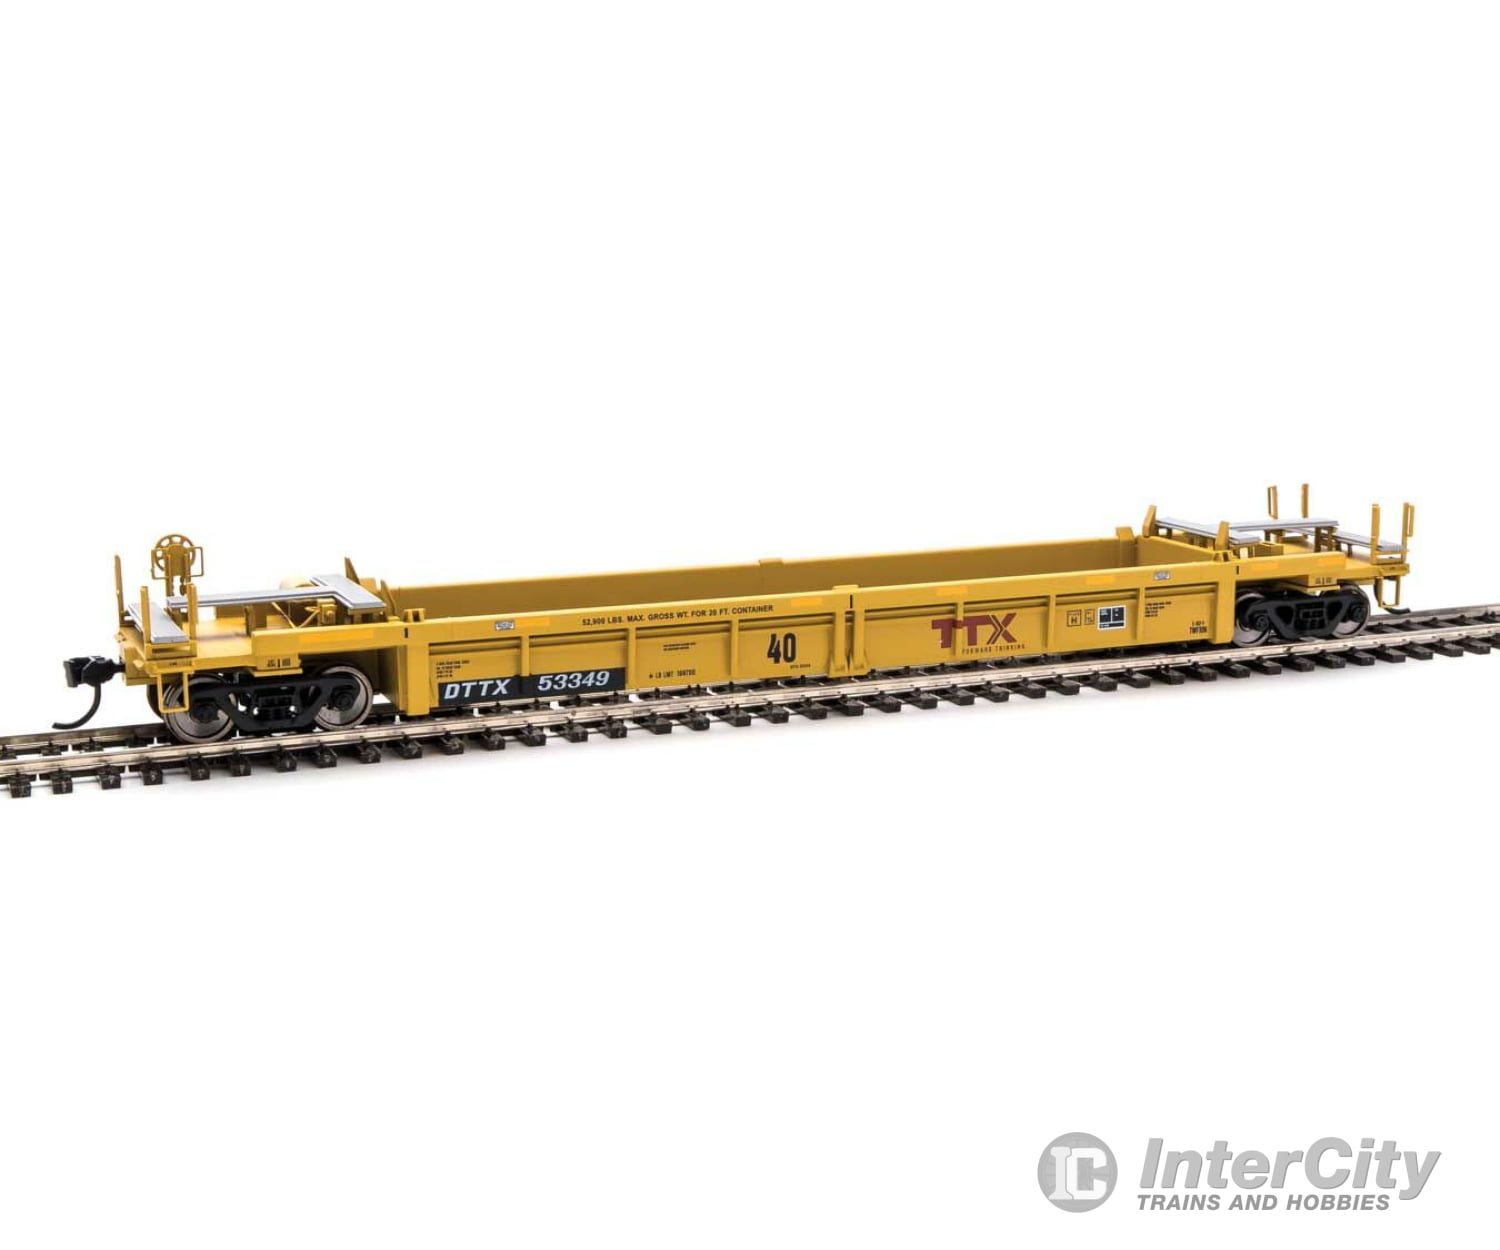 Walthers Mainline Ho 8419 Thrall Rebuilt 40 Well Car - Ready To Run -- Ttx Dttx #53349 (Yellow Black